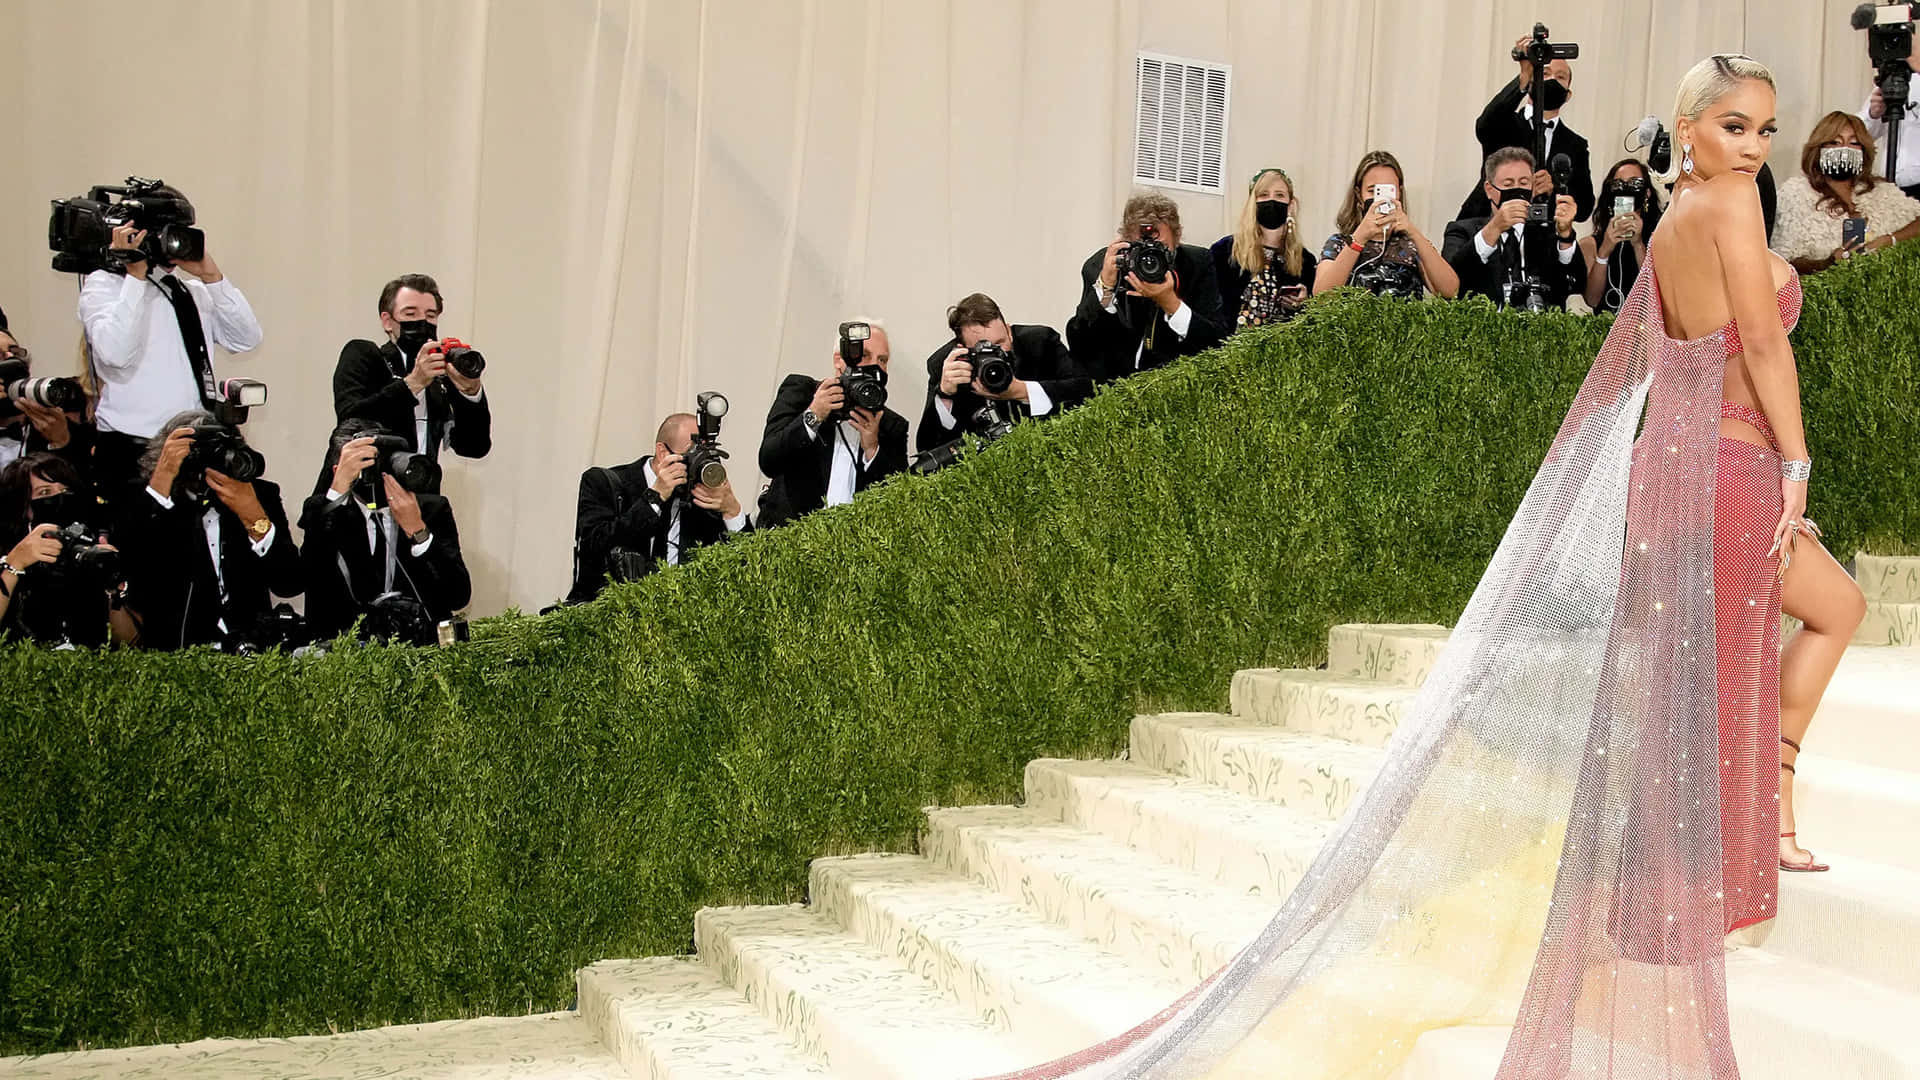 Inaugural Met Gala features celebrities dressed in ethereal and avant-garde fashion